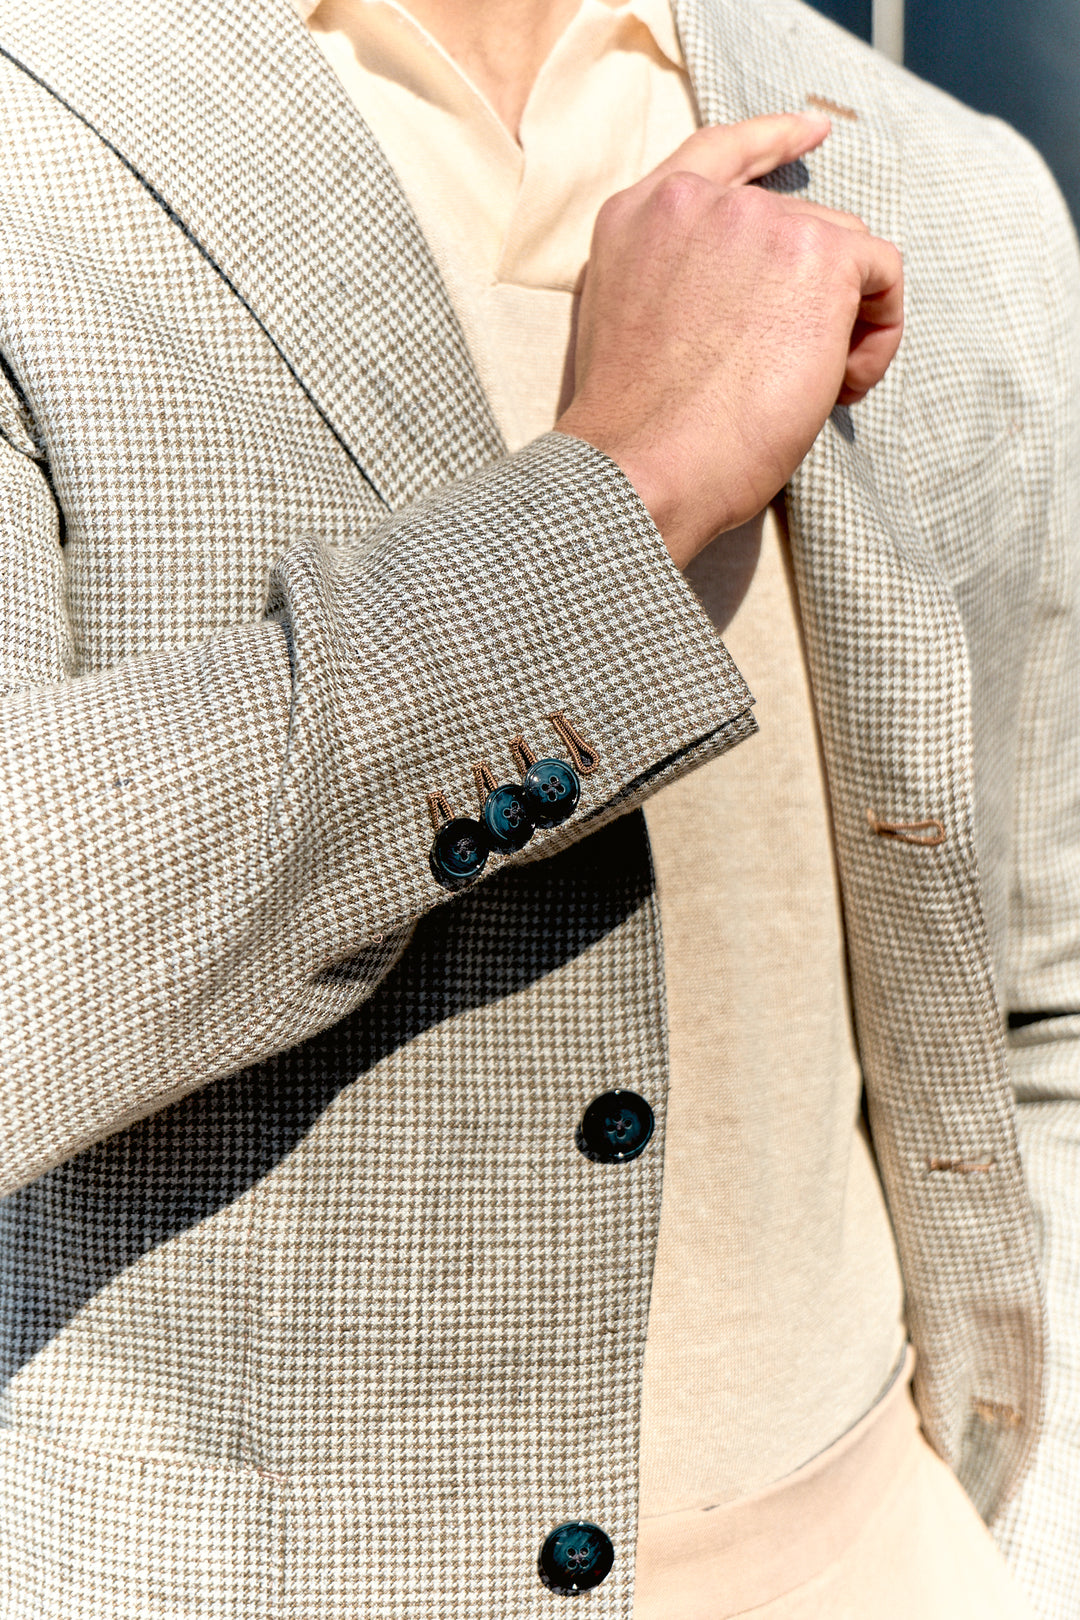 Jimmy Linen Jacket Brown Houndstooth